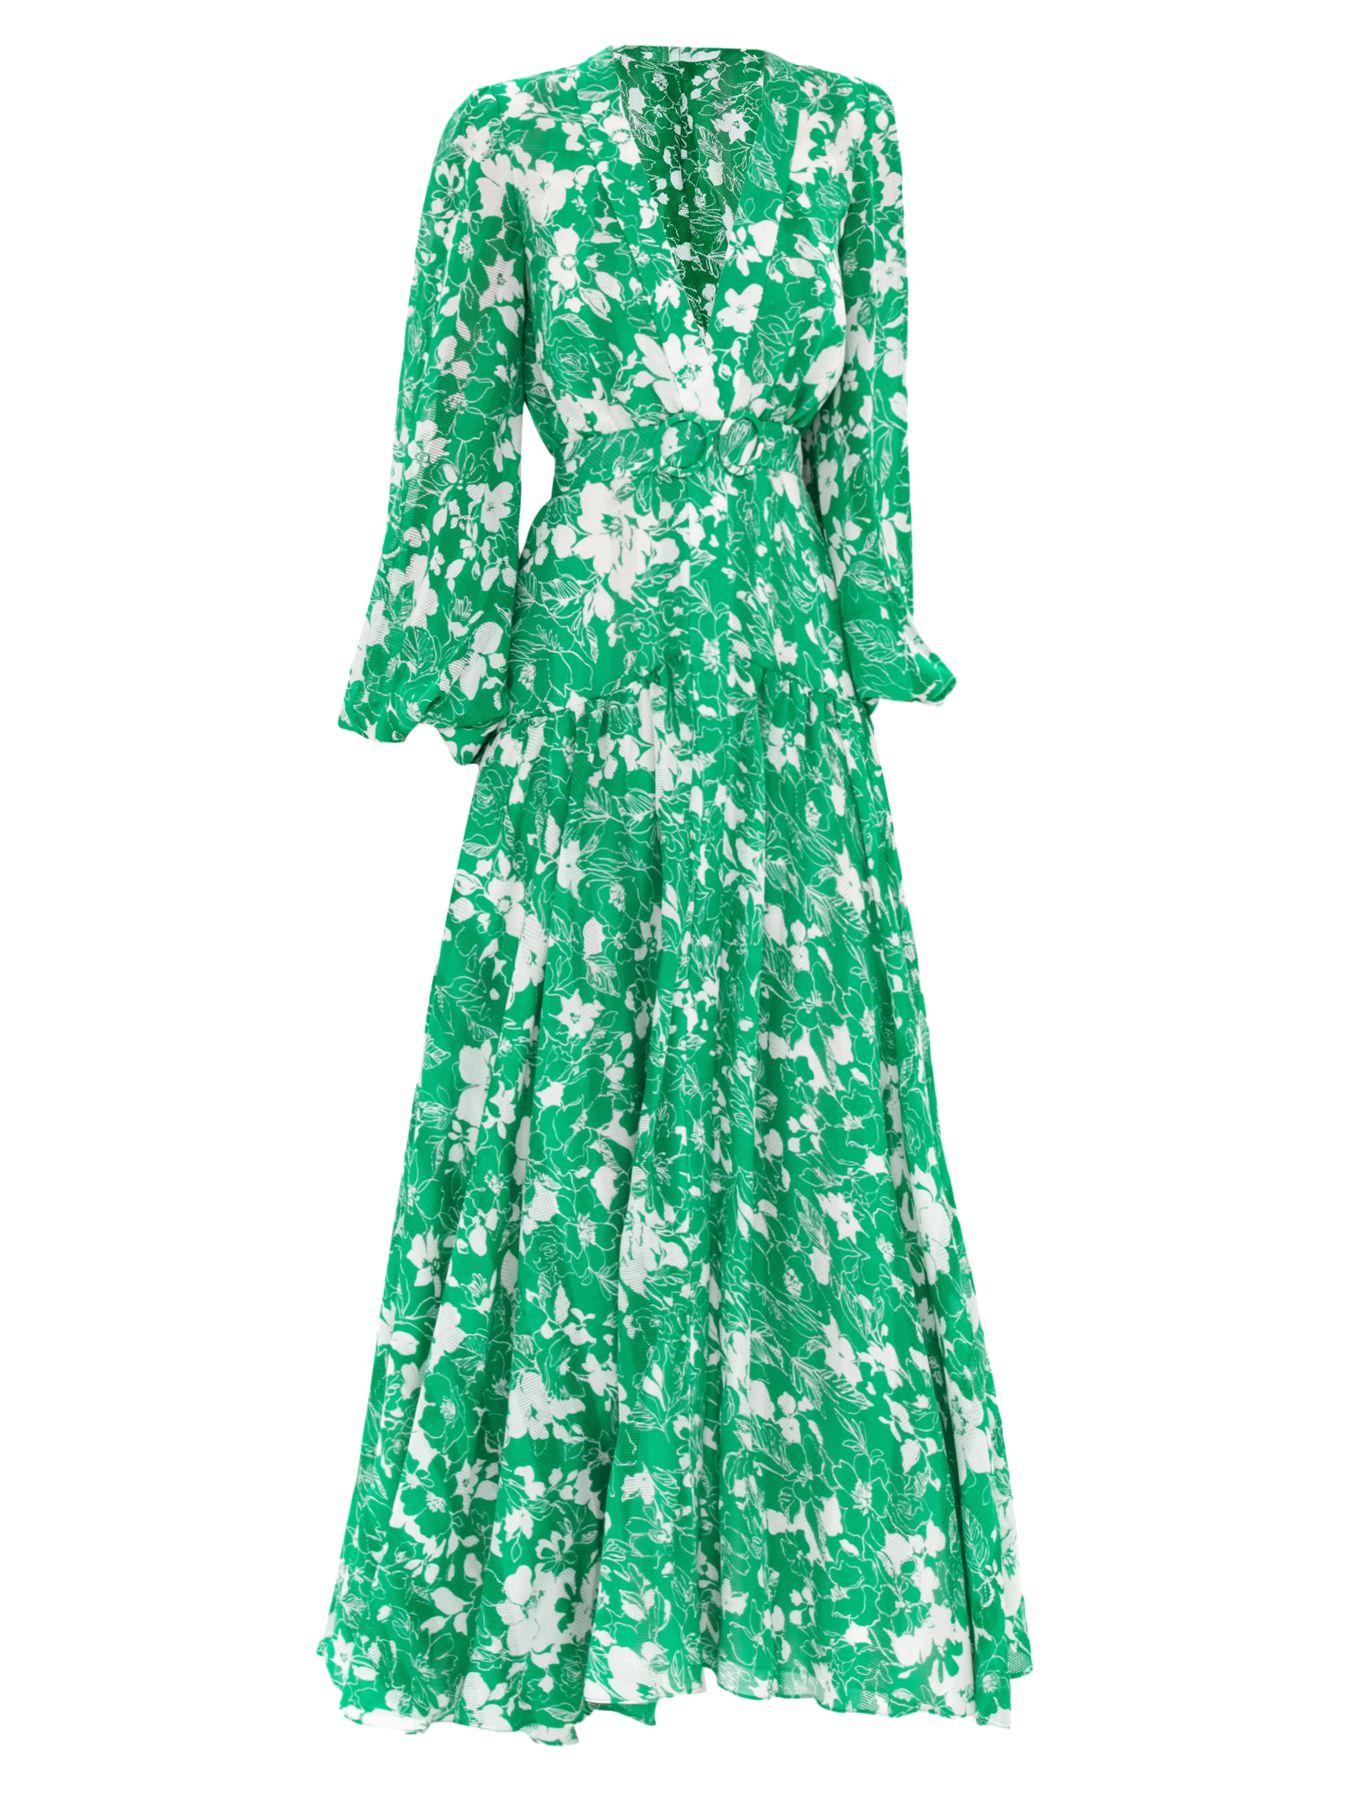 Alexis Cotton Kazmera Floral Maxi Dress in Emerald Floral (Green) - Lyst